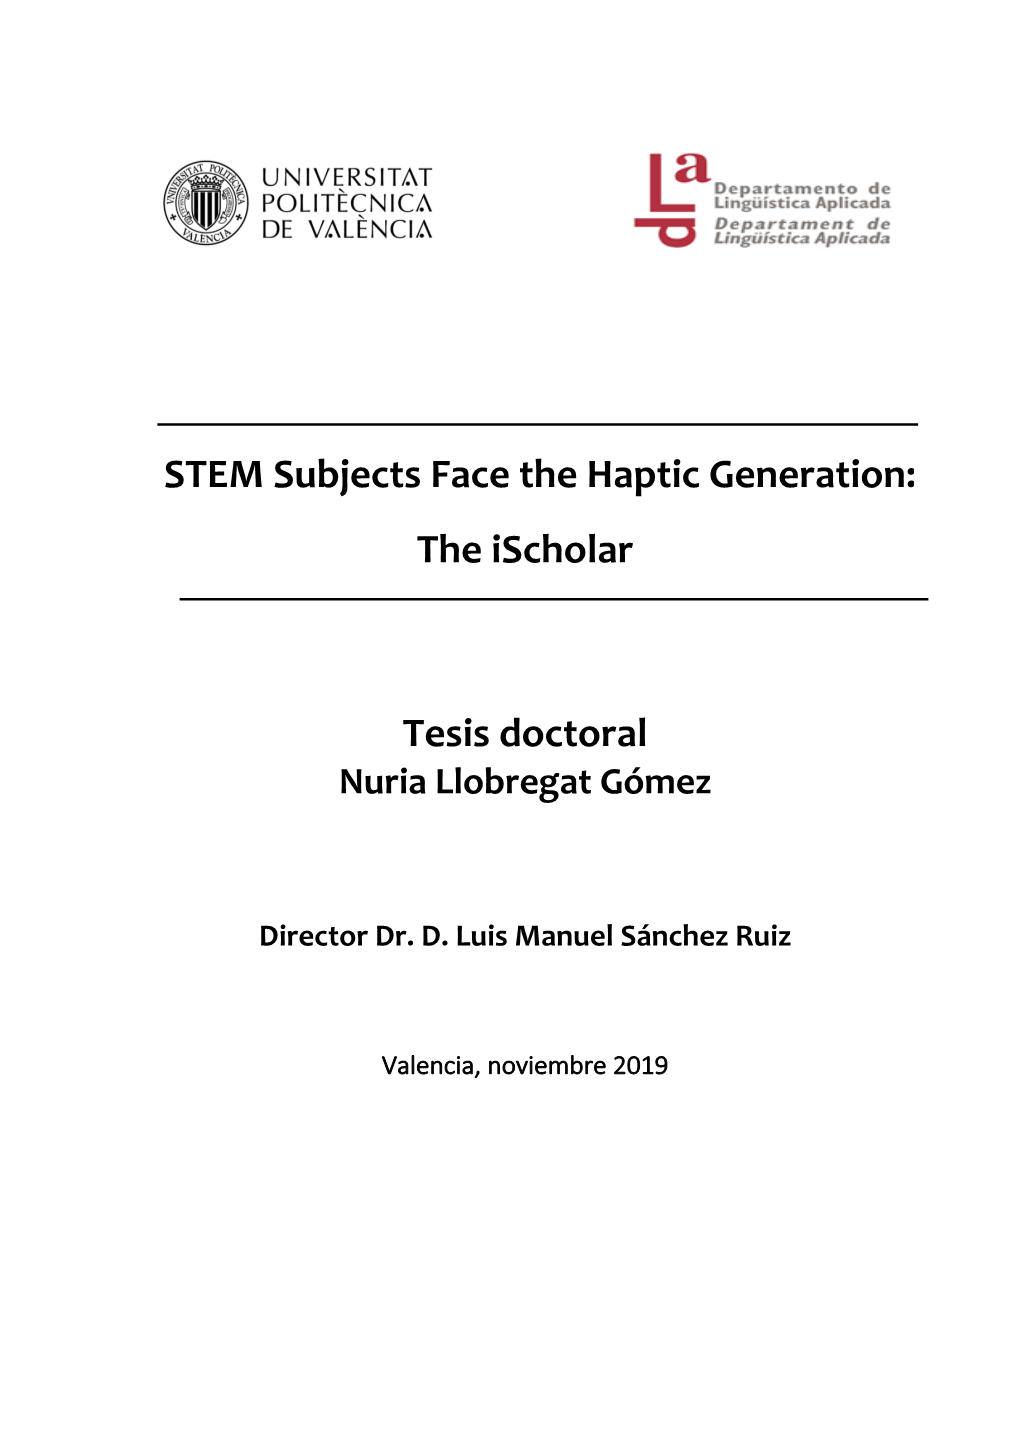 STEM Subjects Face the Haptic Generation: the Ischolar Tesis